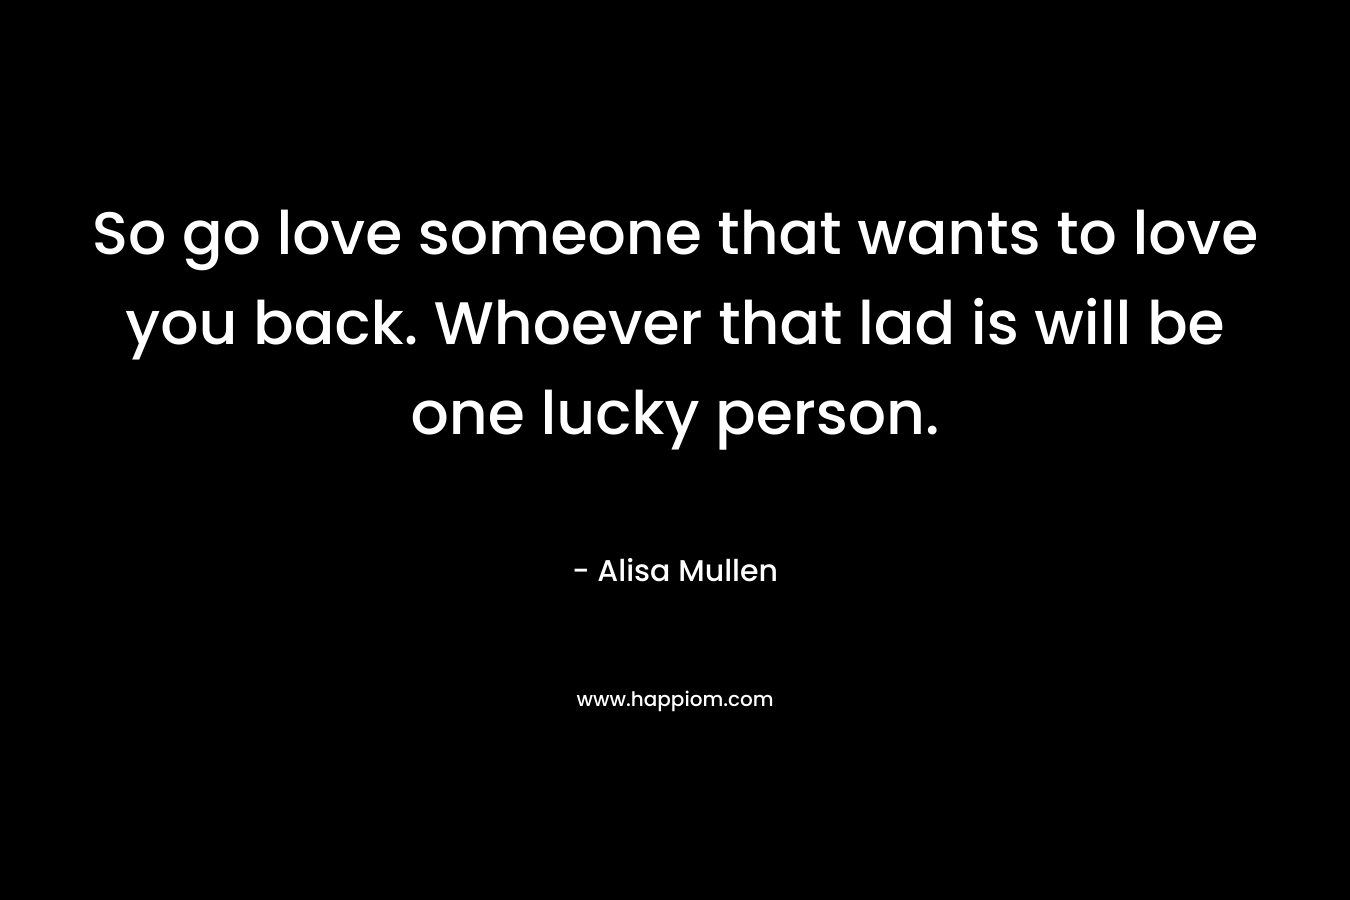 So go love someone that wants to love you back. Whoever that lad is will be one lucky person.